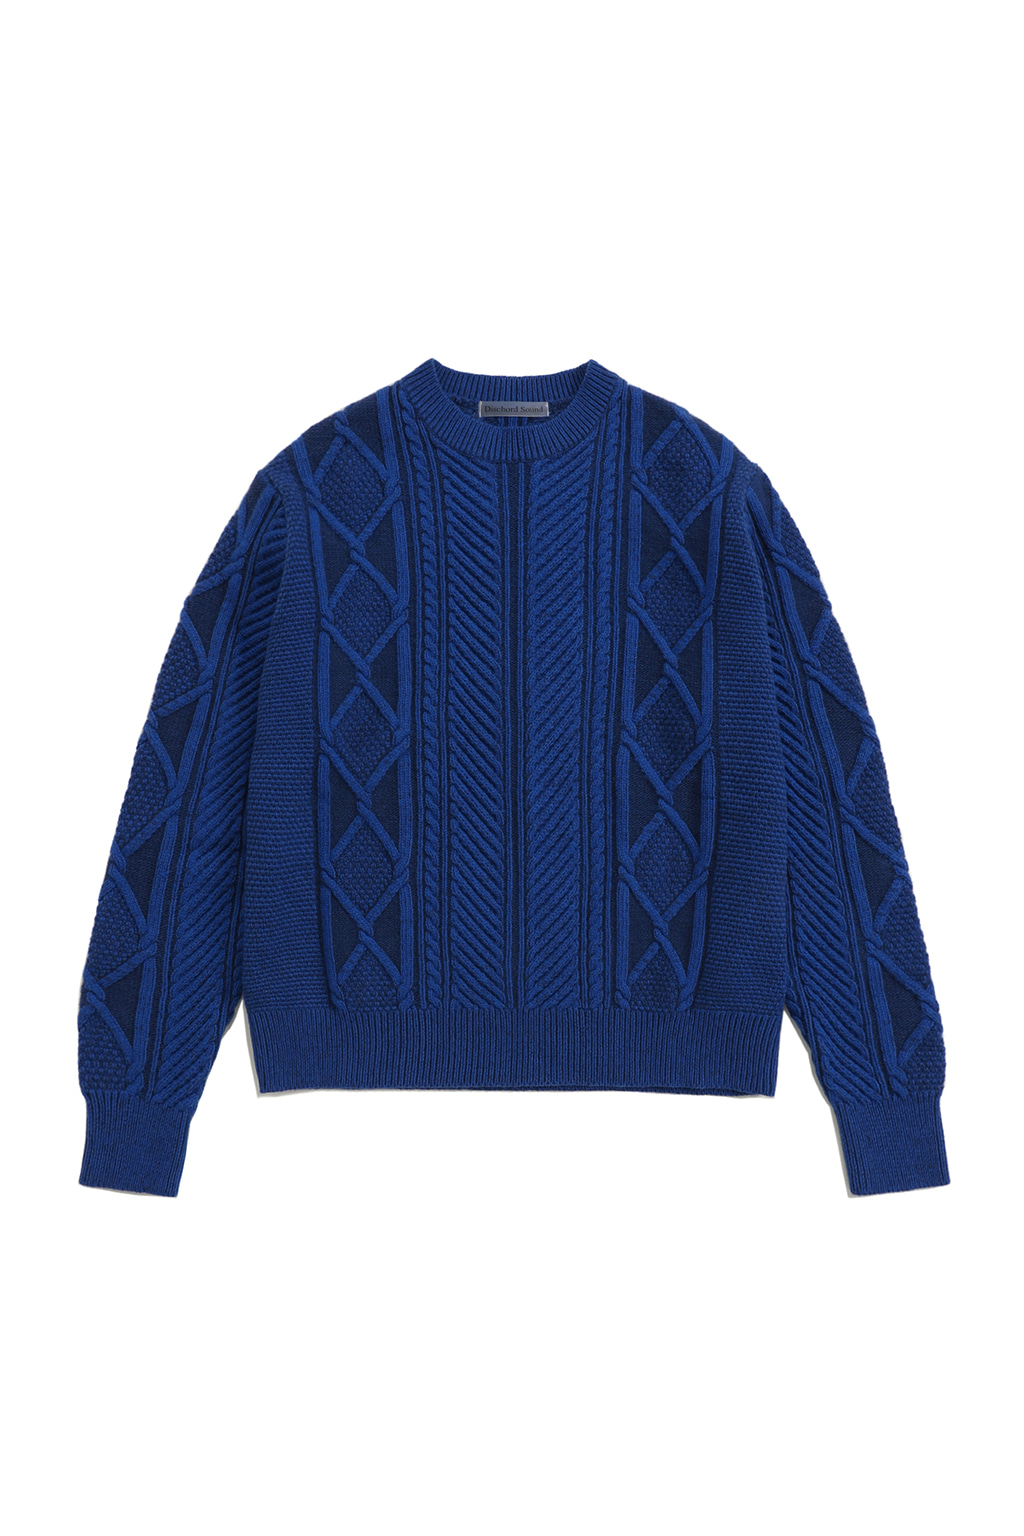 ARAN CABLE TWO TONE KNIT [BLUE]